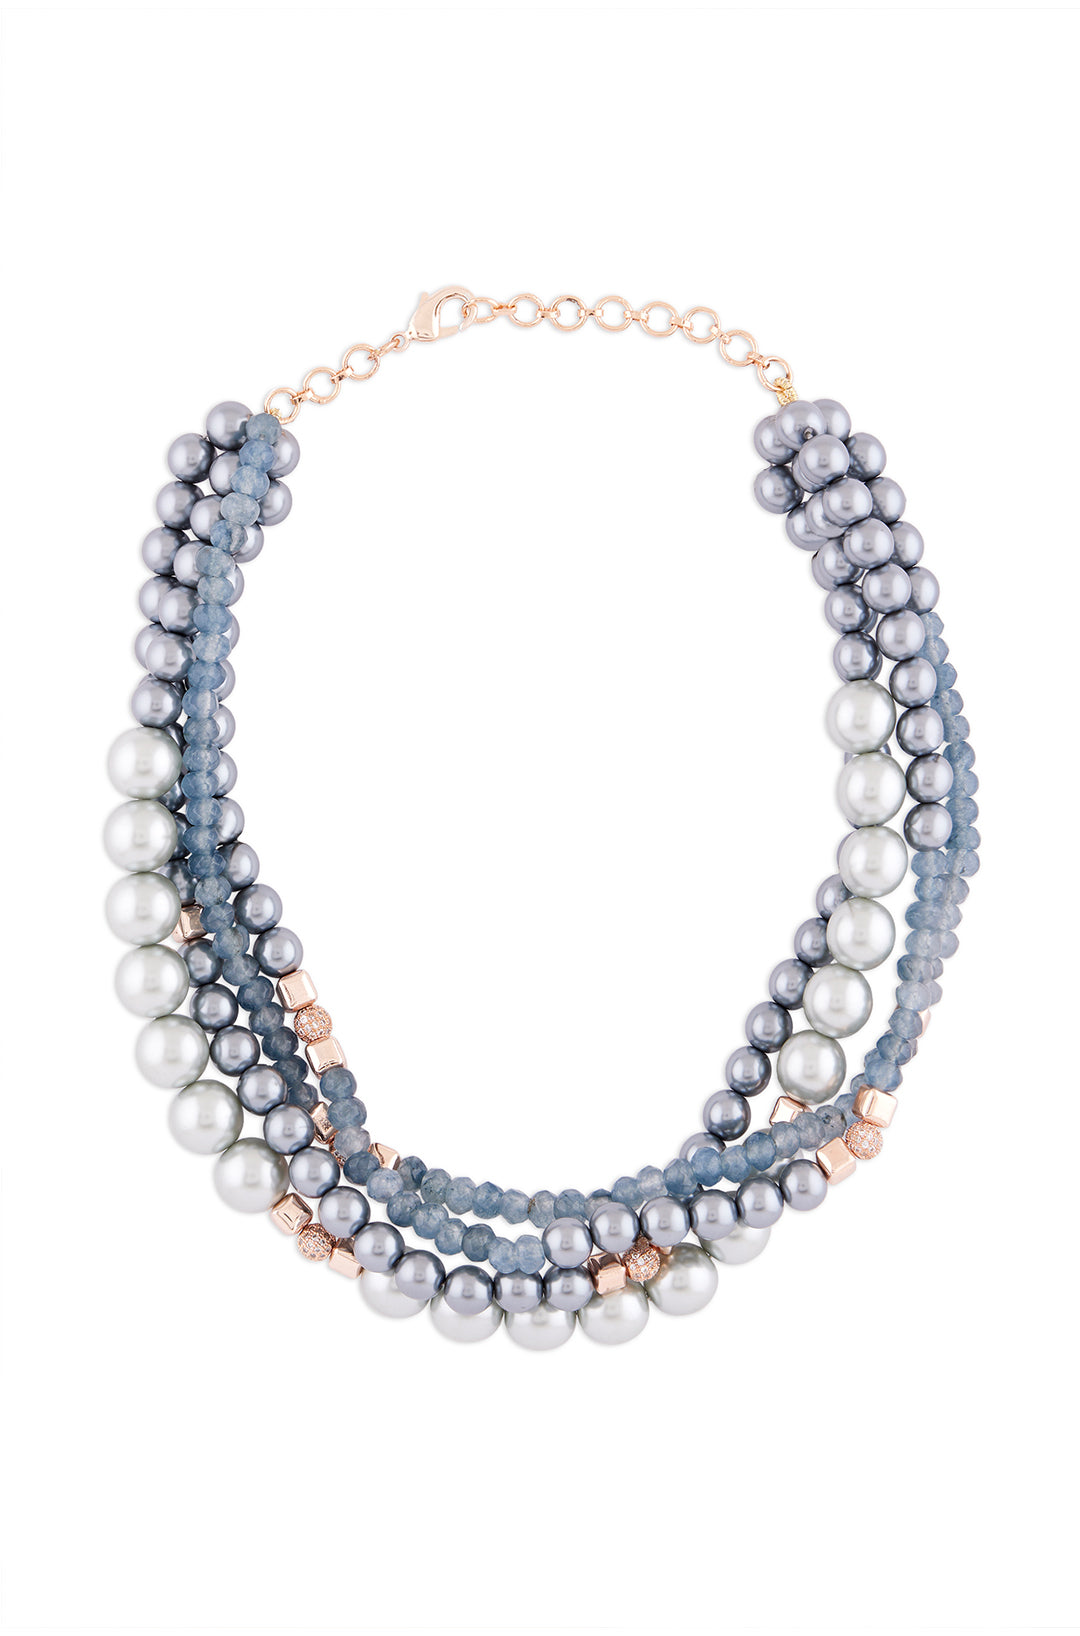 Blue Agate Layered Necklace With Grey Pearls - Joules by Radhika